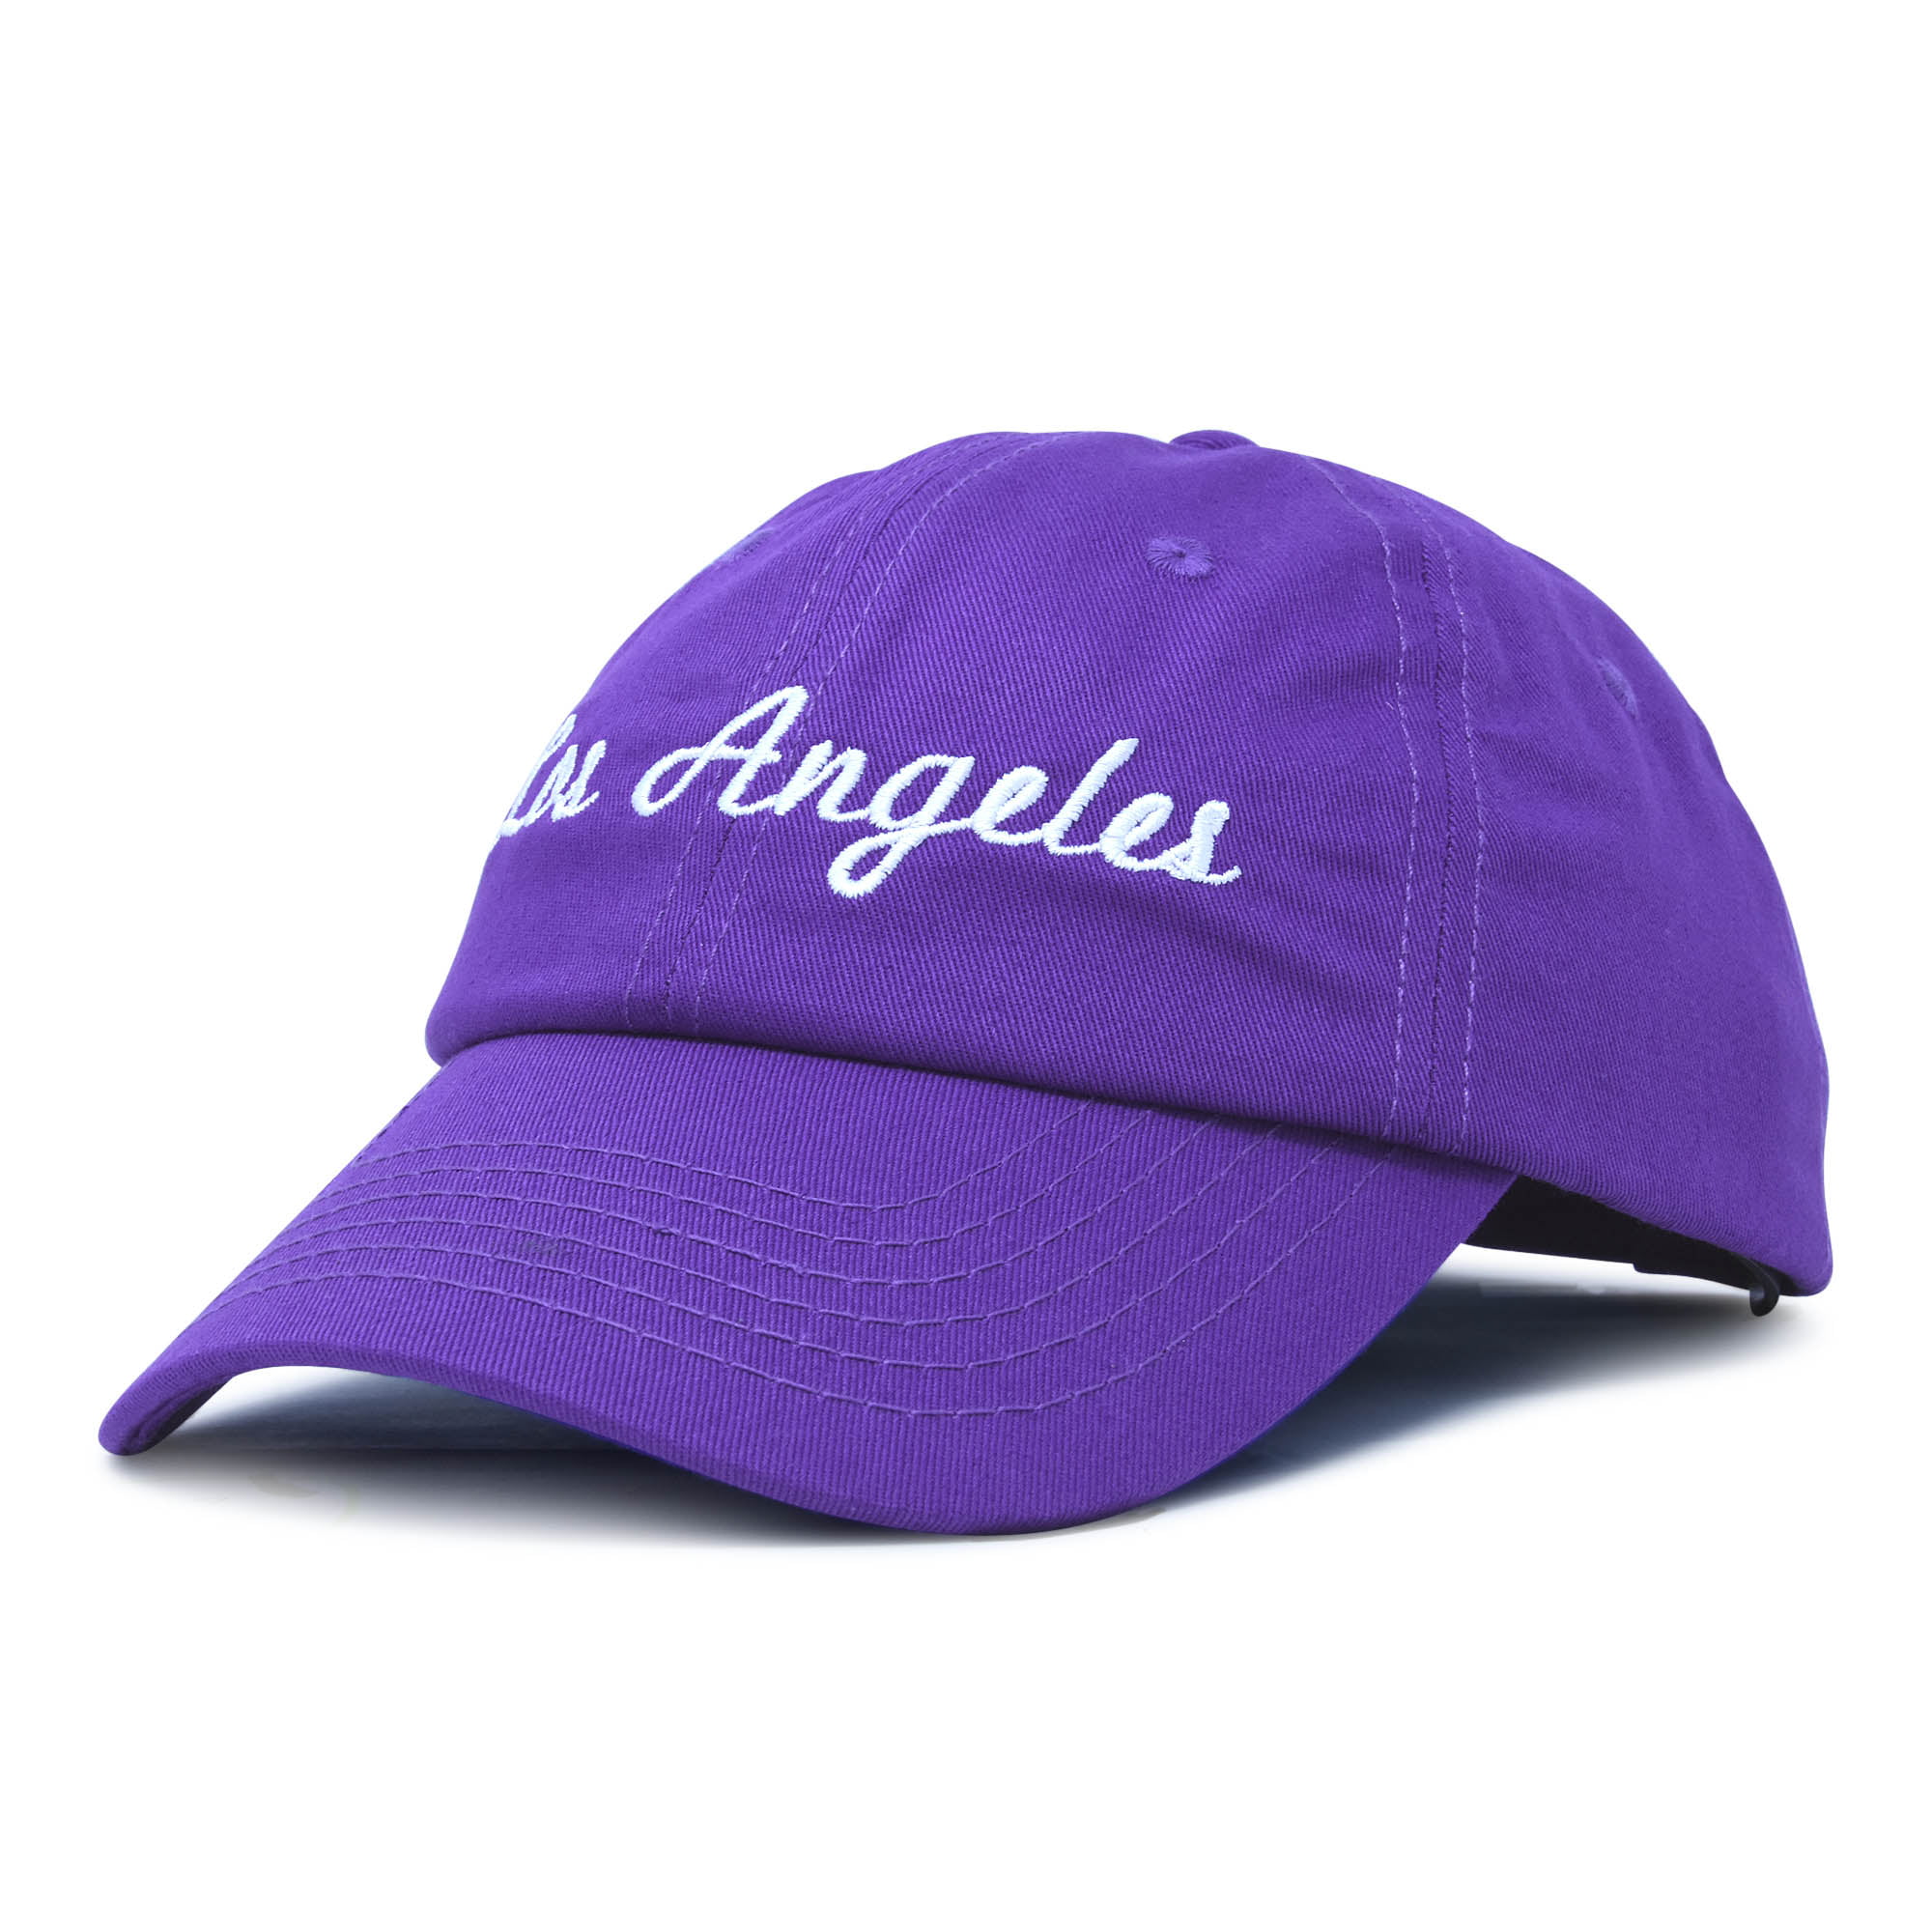 LOS ANGELES "LA" Assorted Colors 3D Embroidery Initials only Baseball Caps/Hats 